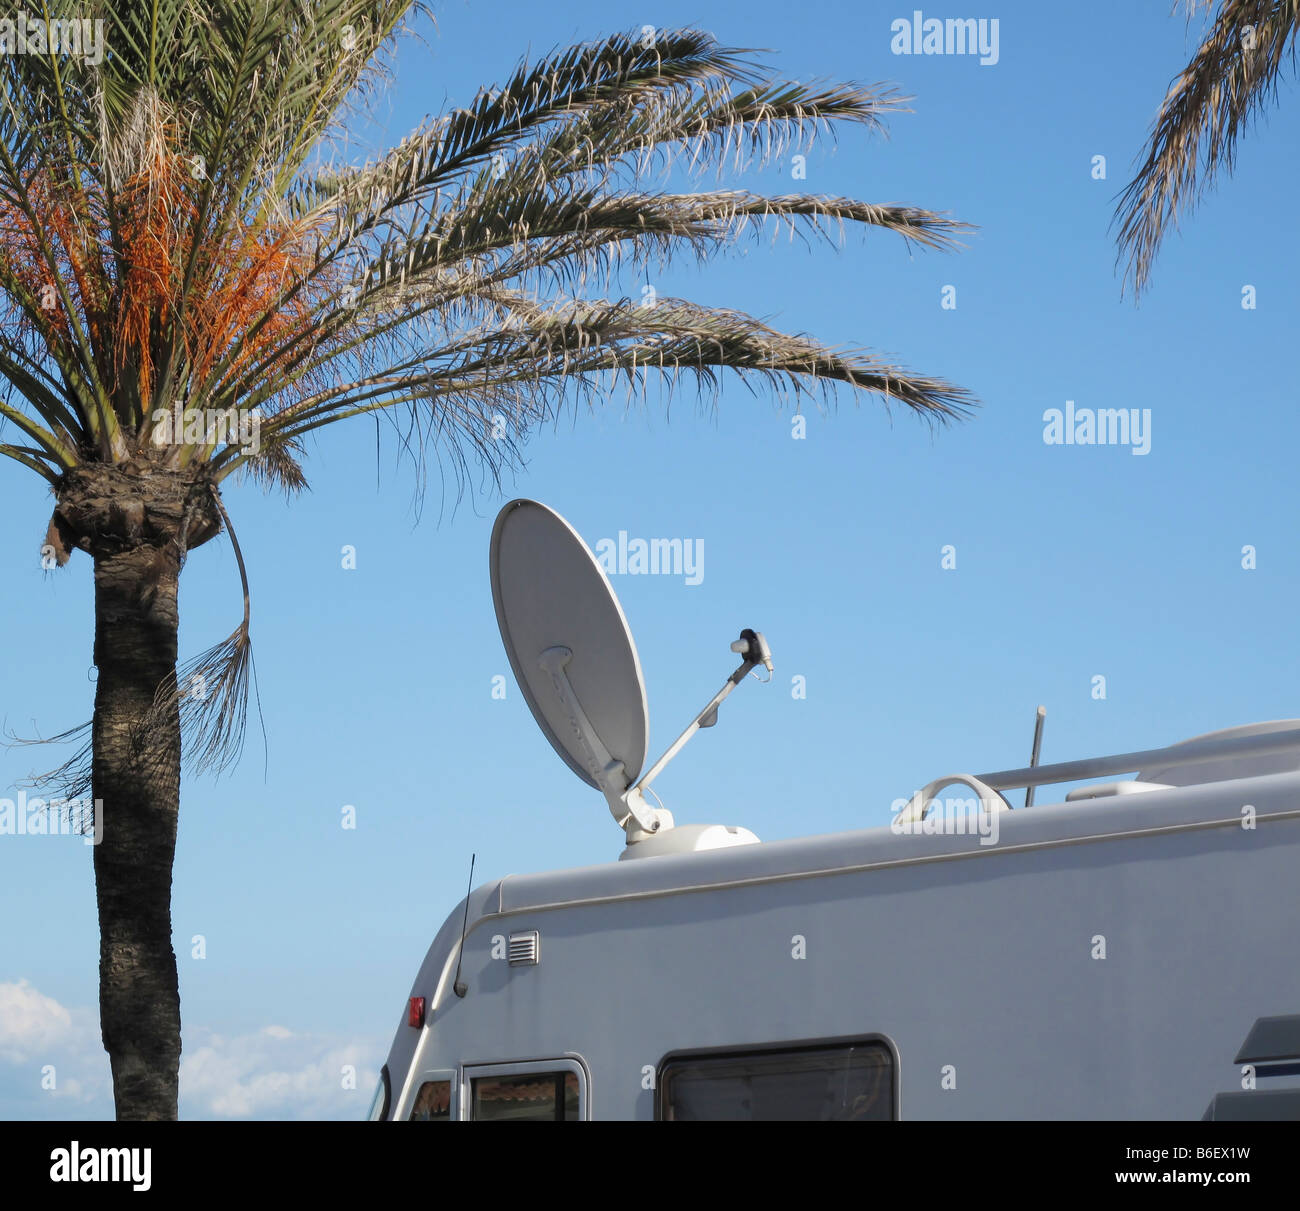 Satellite television dish on roof of camping van Stock Photo